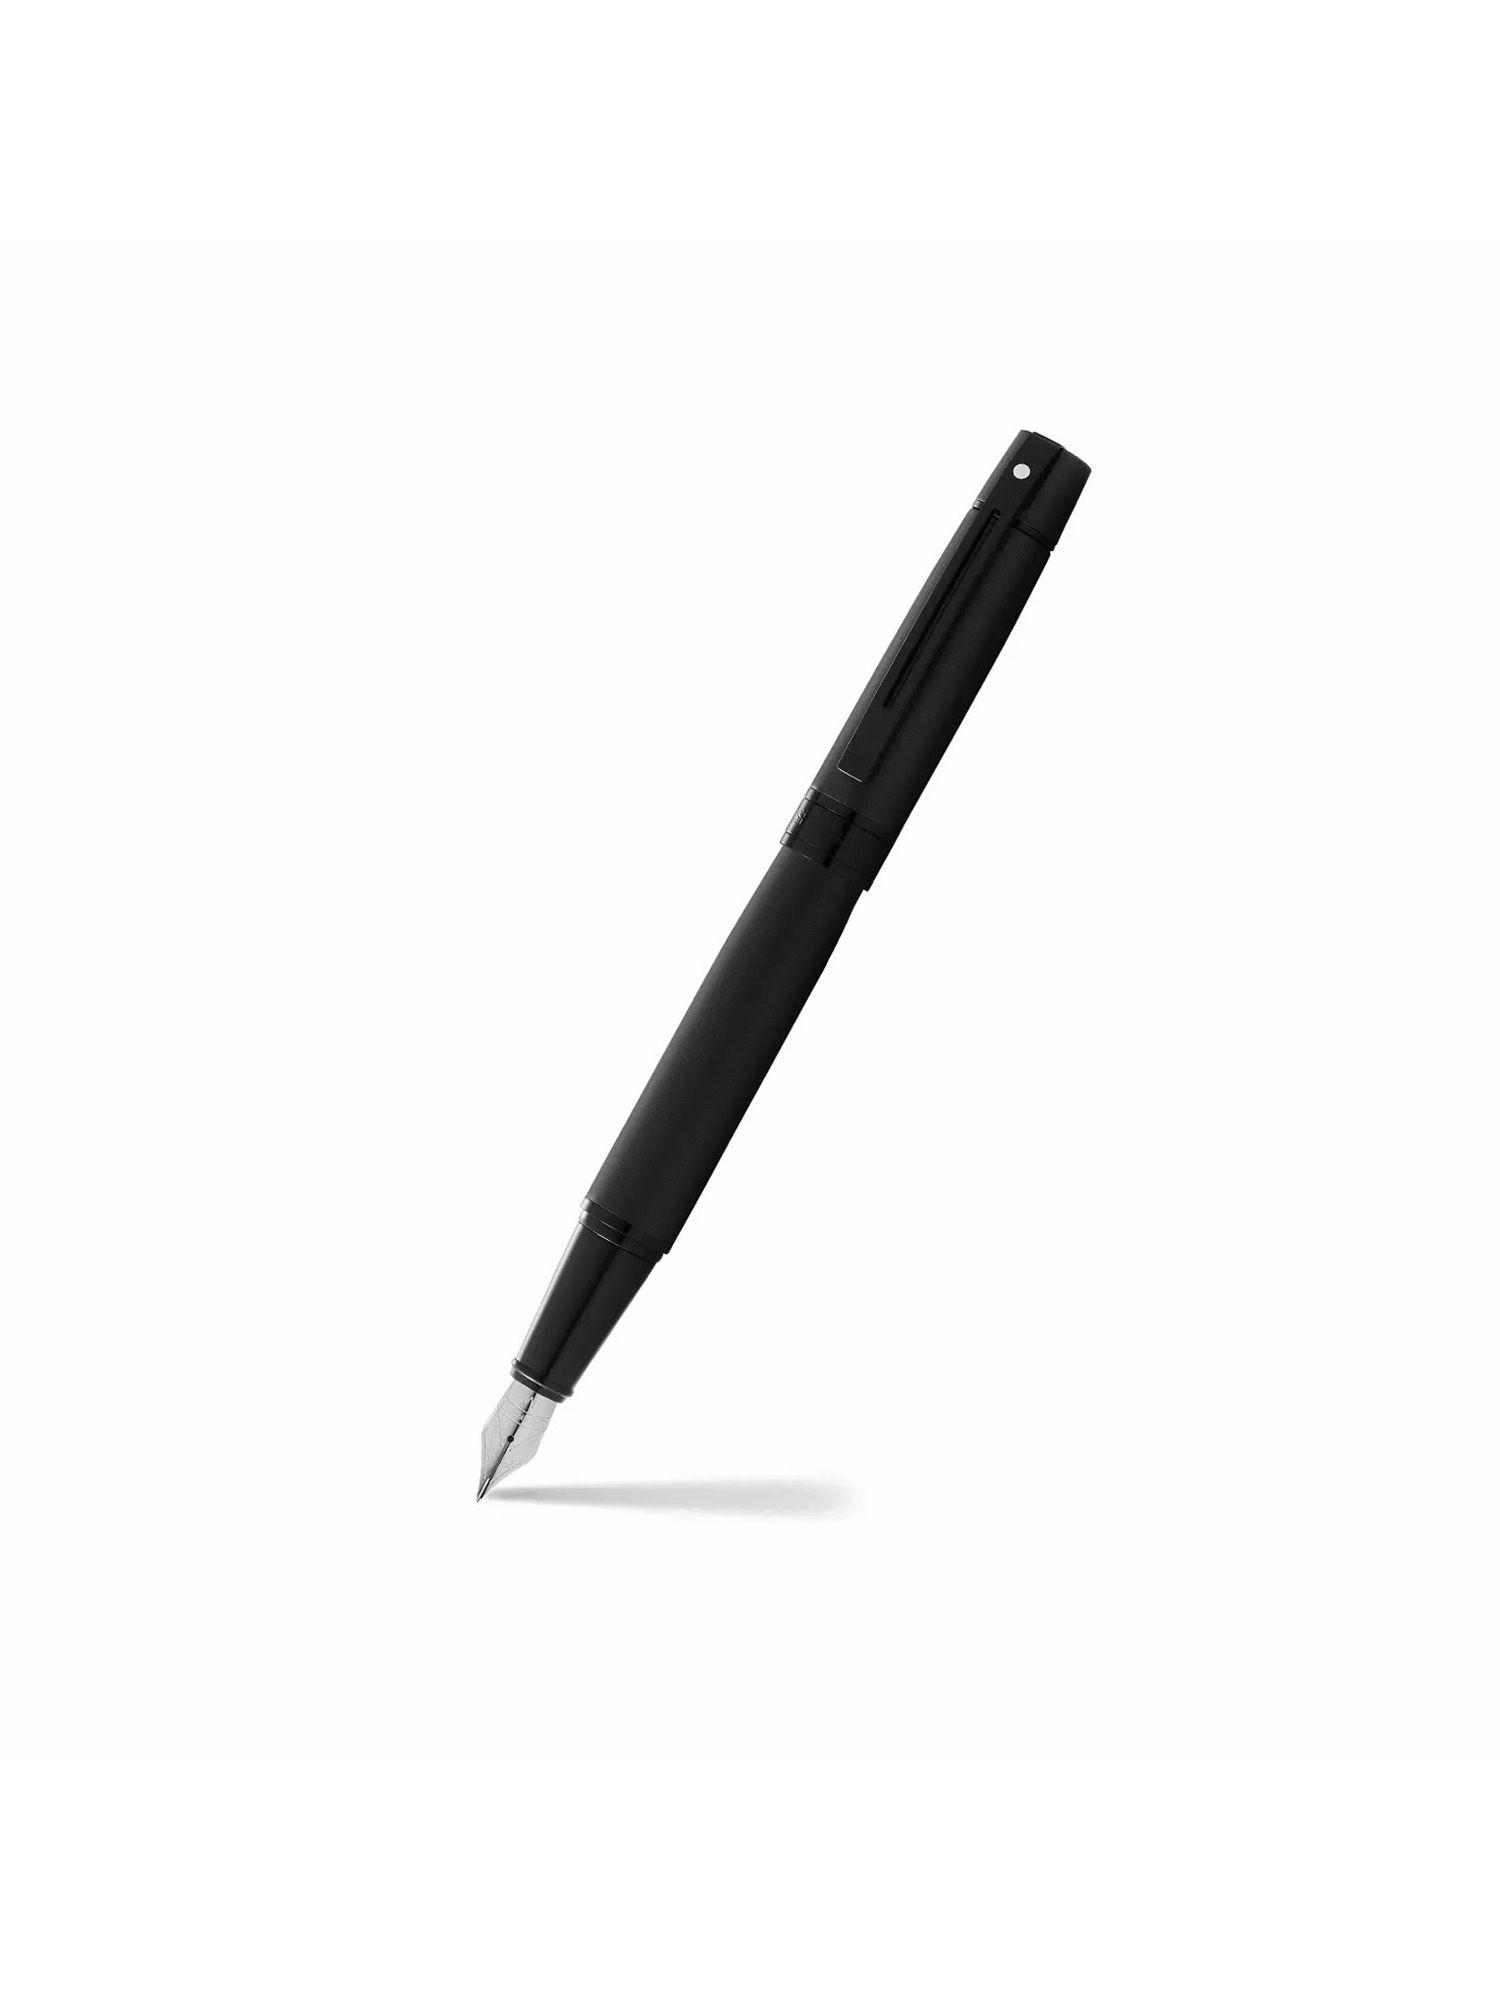 gift 300 lacquer fountain pen -fine – matte black with polished black trim